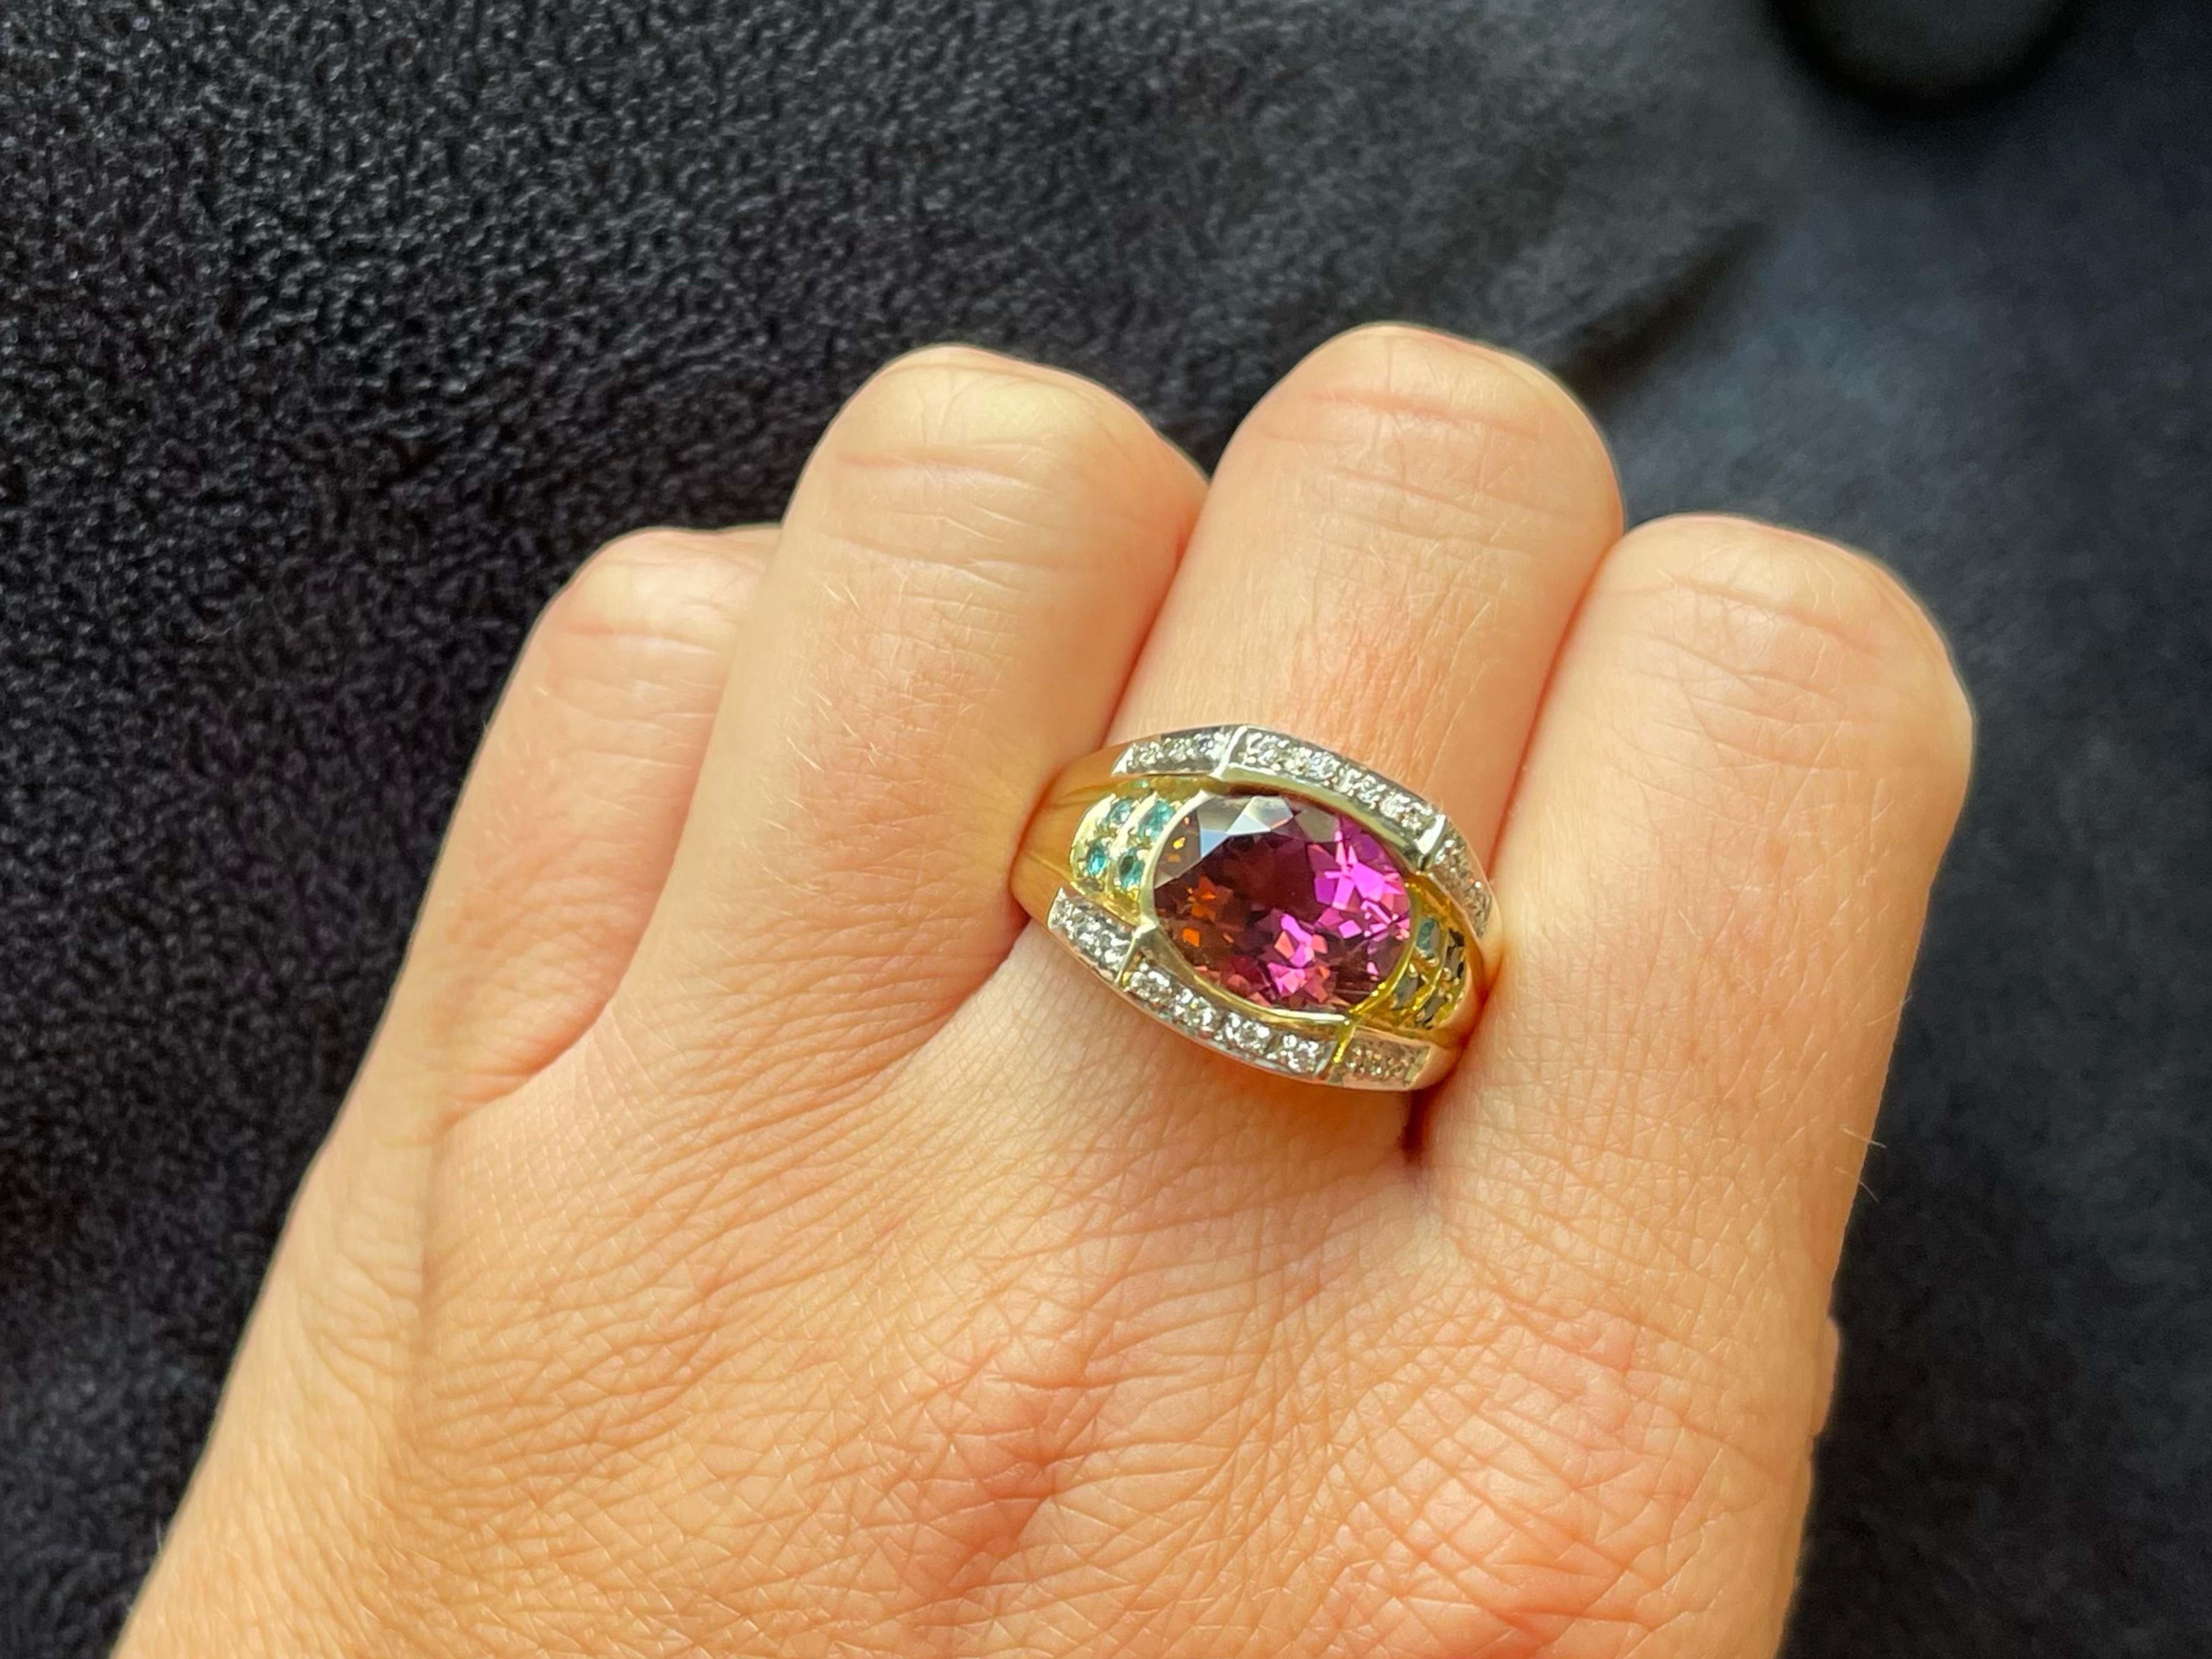 Item Specifications:

Metal: 14K Yellow Gold

Style: Statement Ring

Ring Size: 8.75 (resizing available for a fee)
​
​Ring Height: 13.86 mm

Total Weight: 8.0 Grams

Gemstone Specifications:

Gemstones: 1 Pink rubellite garnet

Garnet Carat Weight: